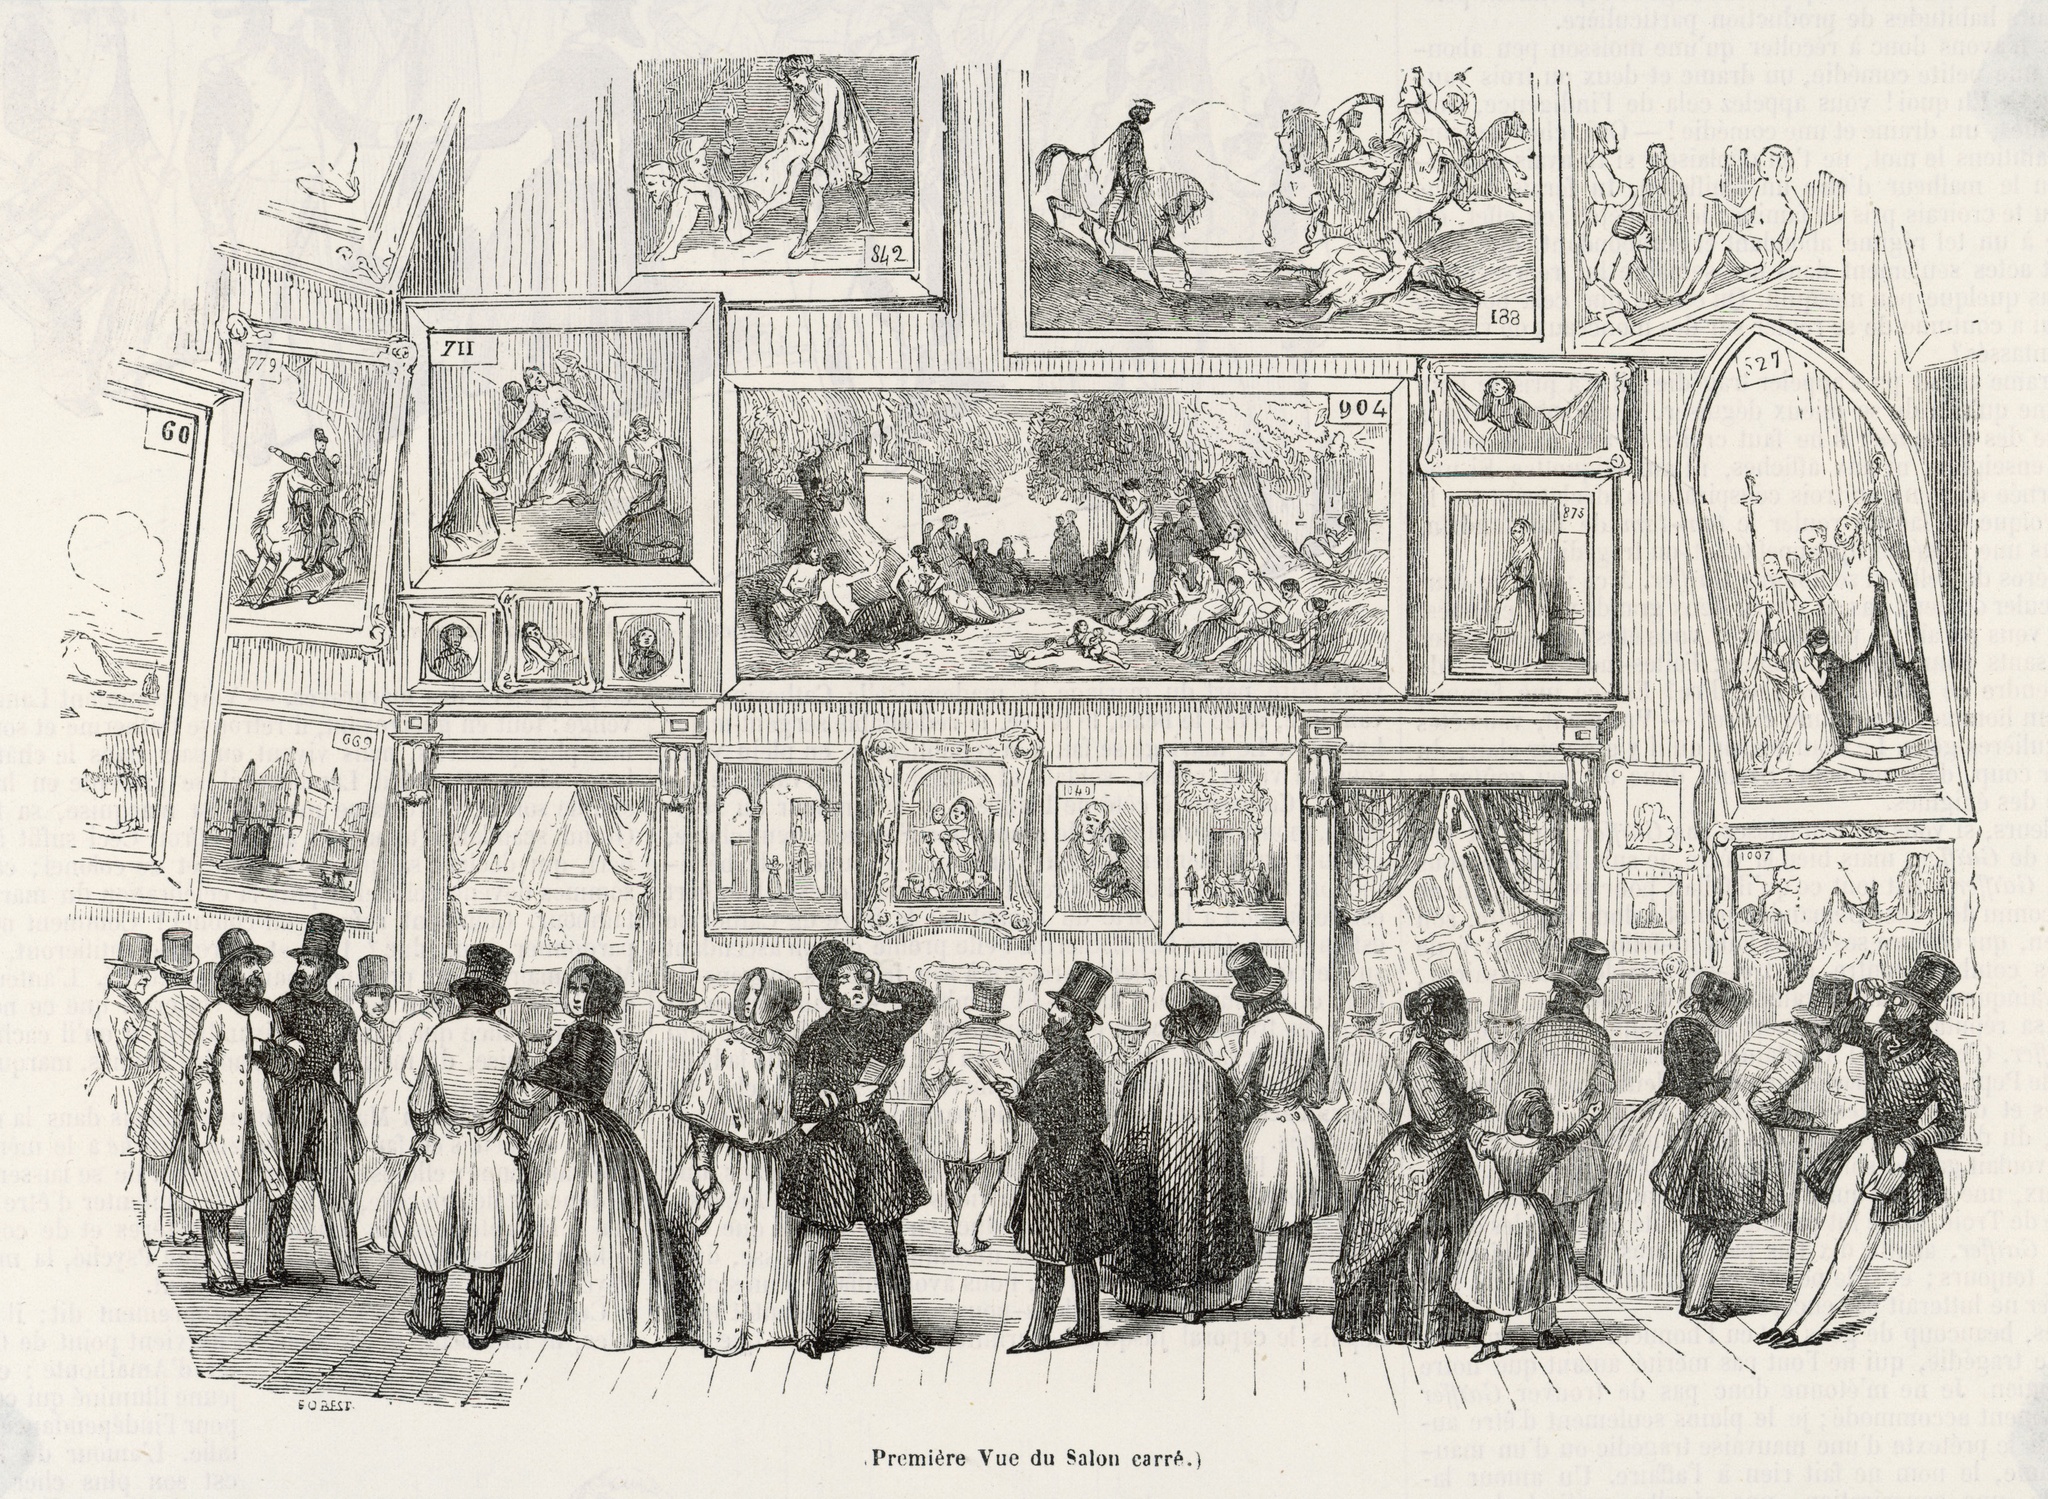 A reproduction of a drawing of a 19th-century salon-style art exhibition. Audience members look at a wall with framed artworks